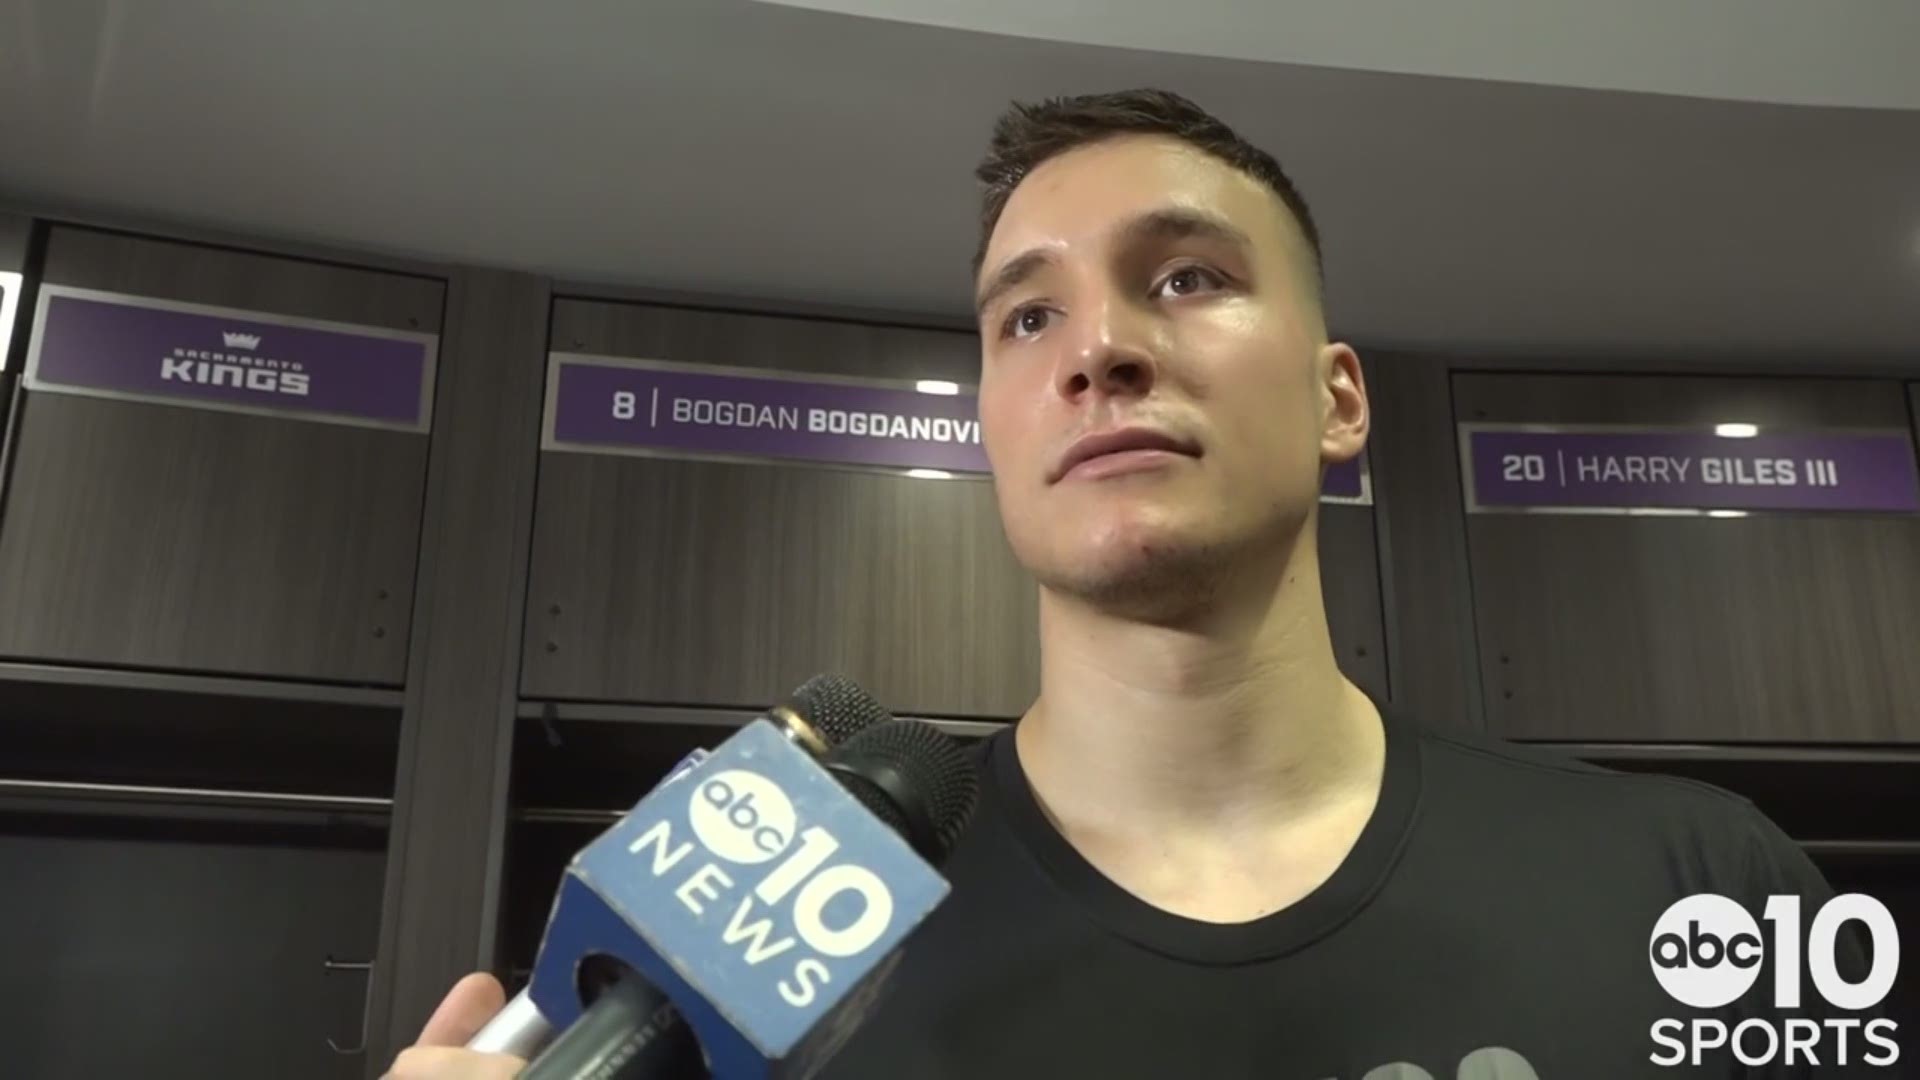 Bogdan Bogdanovic talks about his career-high performance leading the Sacramento Kings with 31 points en route to a 120-116 victory over the Phoenix Suns on Tuesday.